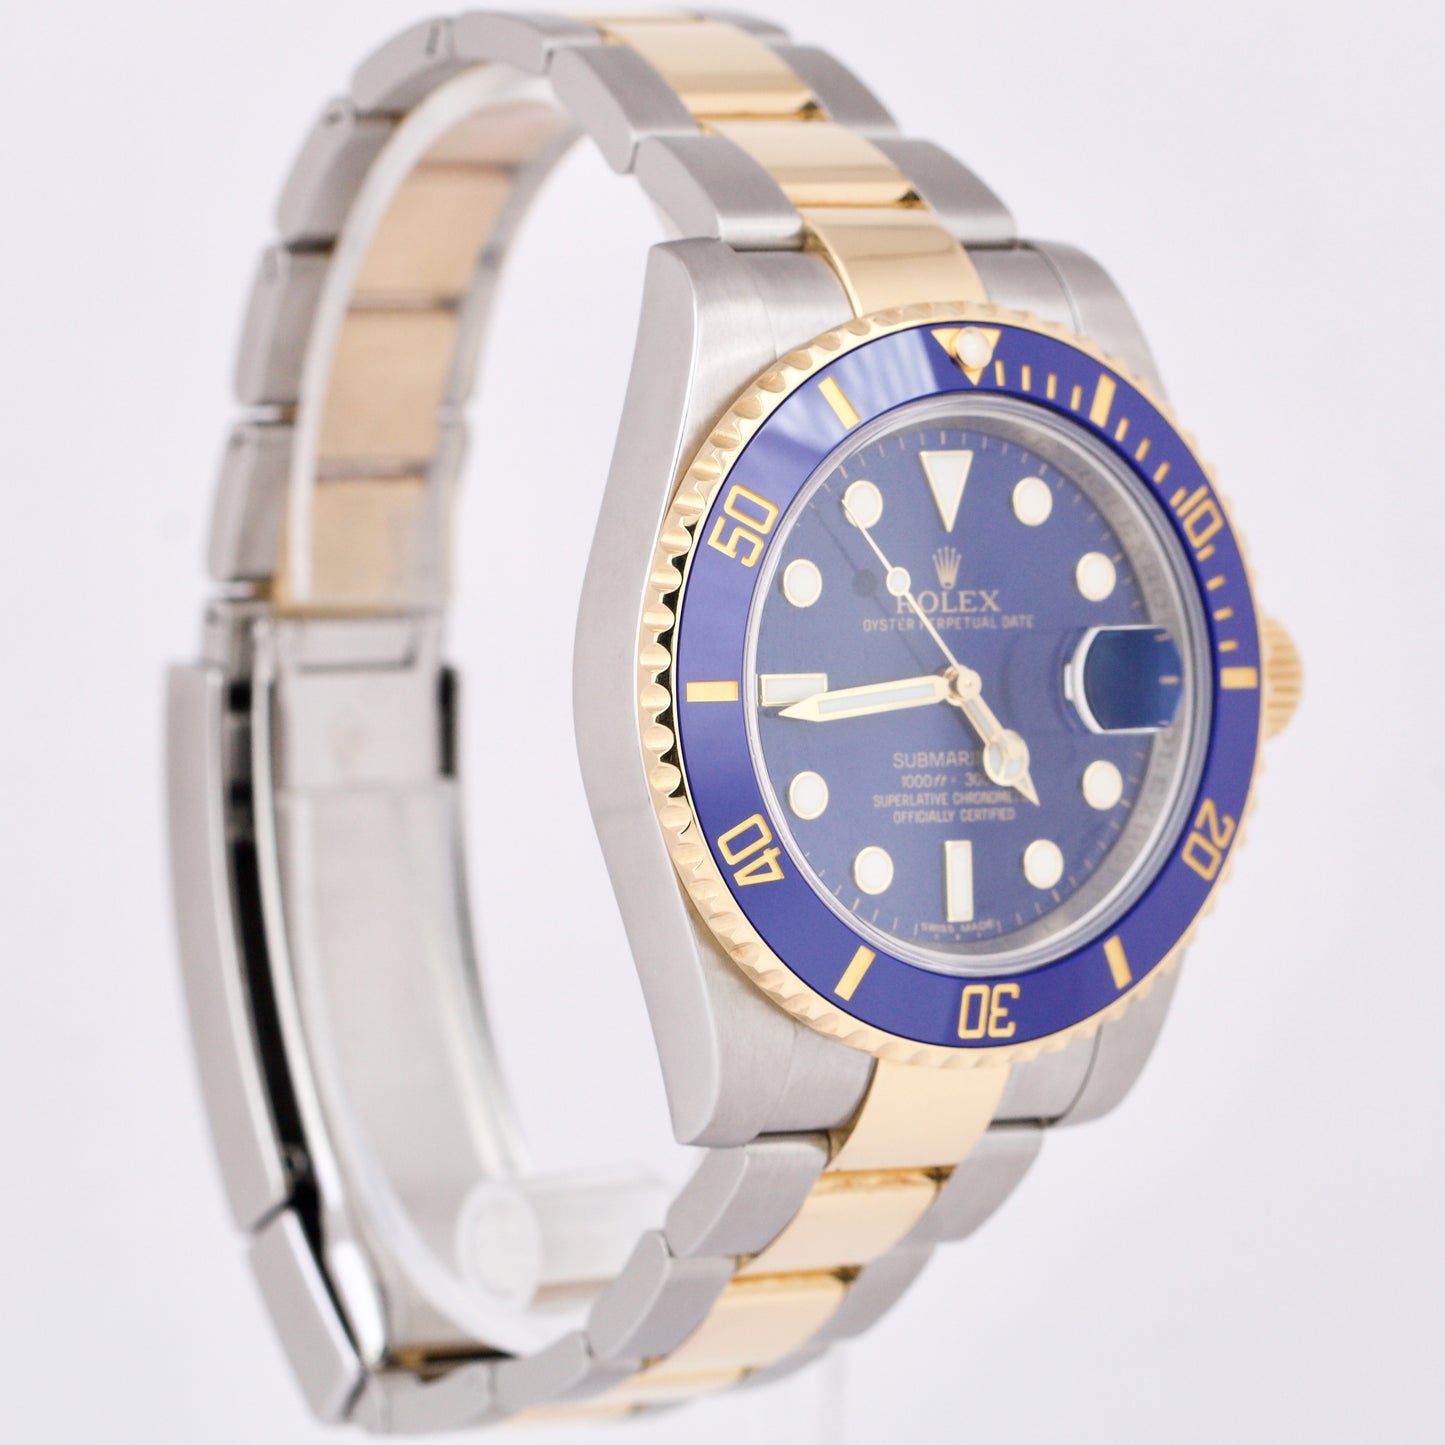 2019 Rolex Submariner Date BLUE Two-Tone 18K Gold Ceramic PAPERS 116613 LB B+P